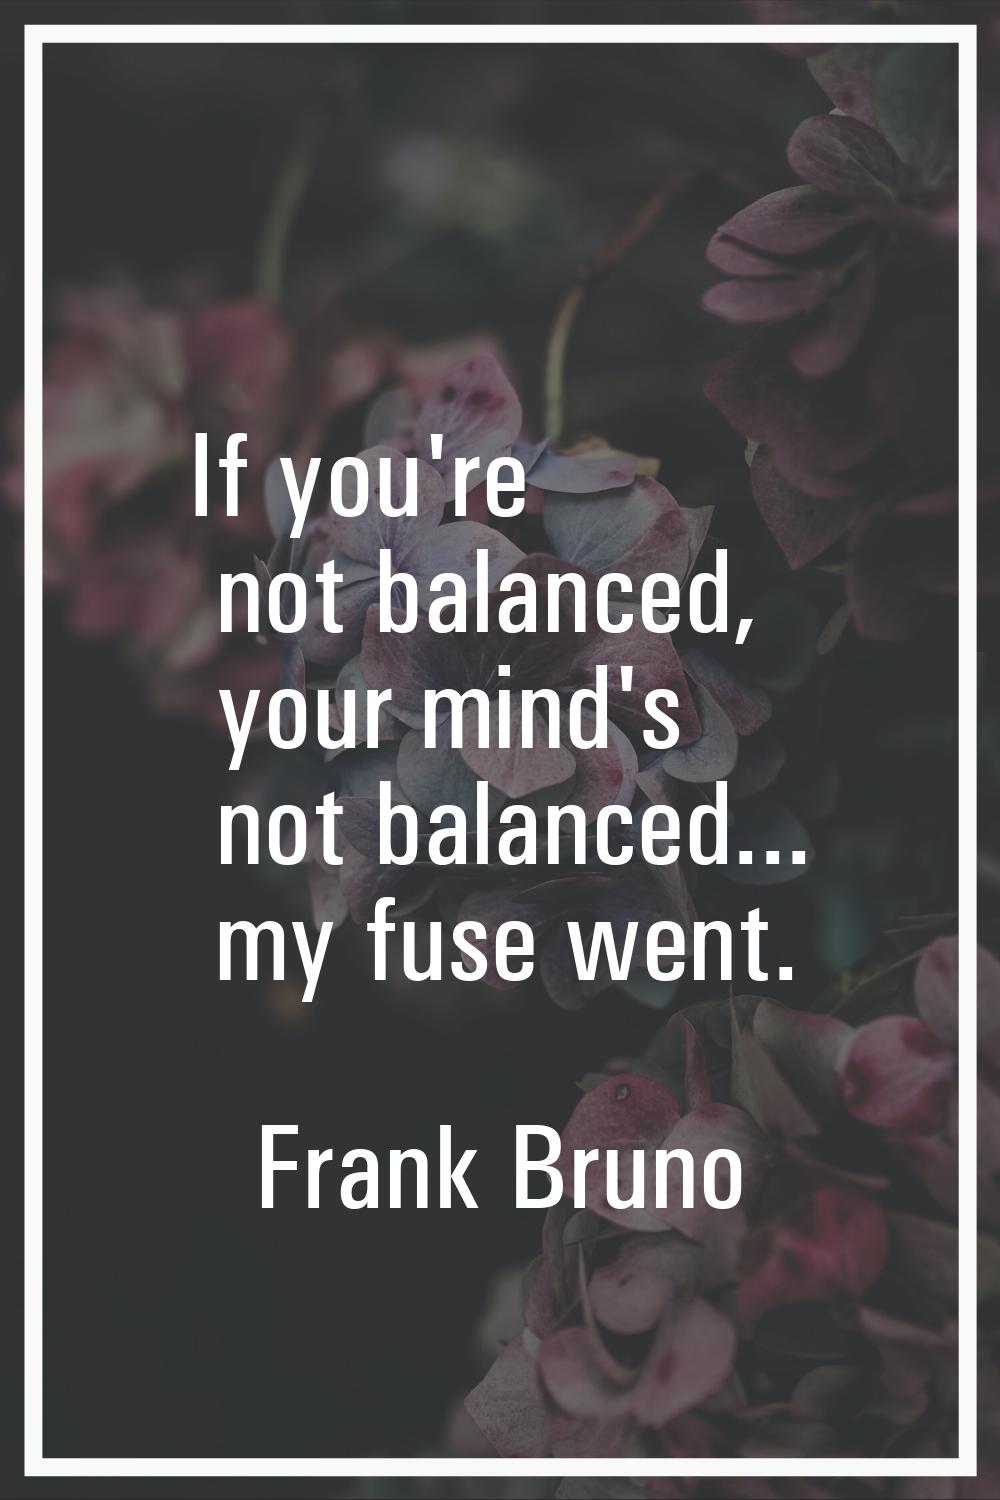 If you're not balanced, your mind's not balanced... my fuse went.